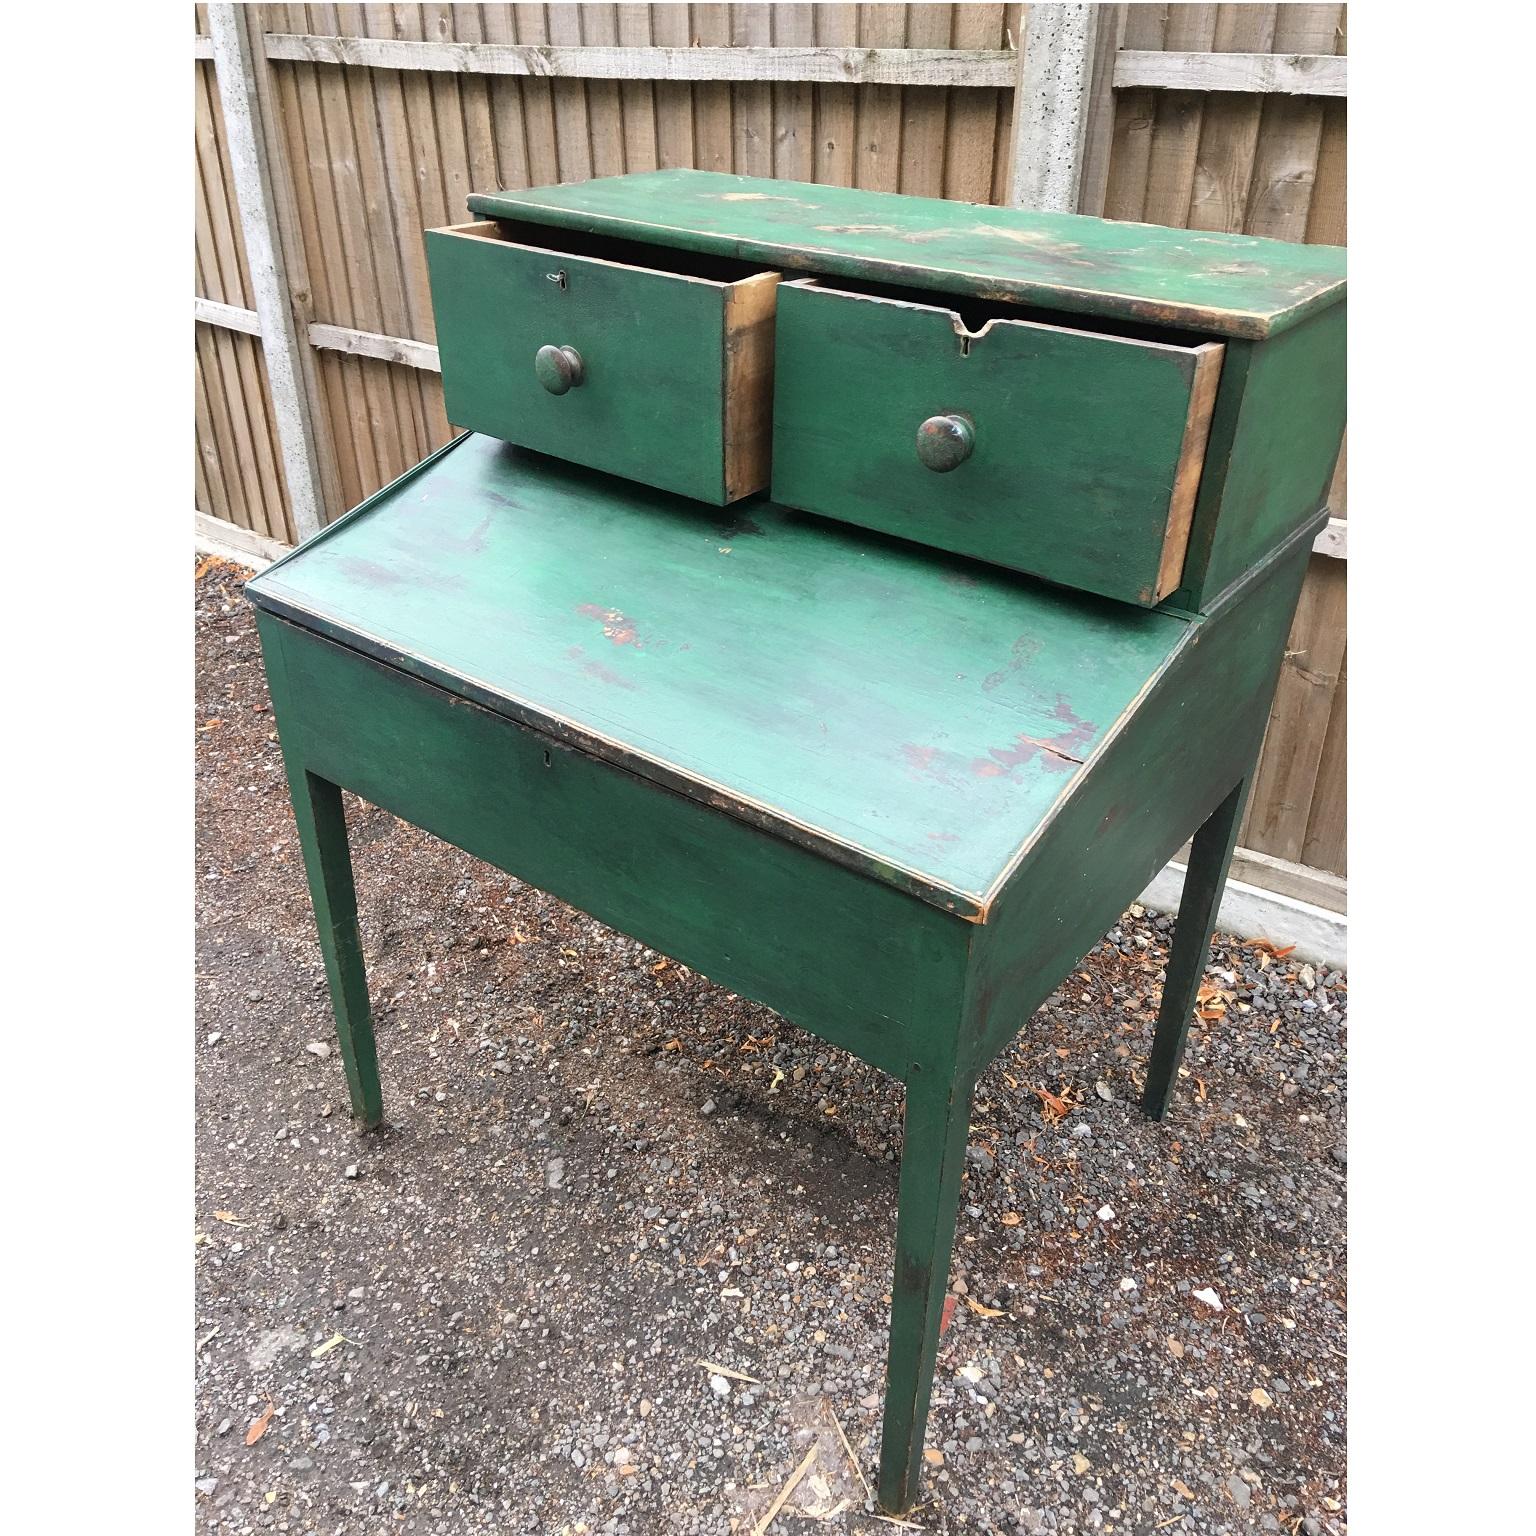 American primitive 19th century green painted clerks desk, possibly a plantation desk,
circa 1880

Standing on four legs, the slope itself has a ledge to hold paperwork and books, it opens to reveal a large compartment with a row of small drawers